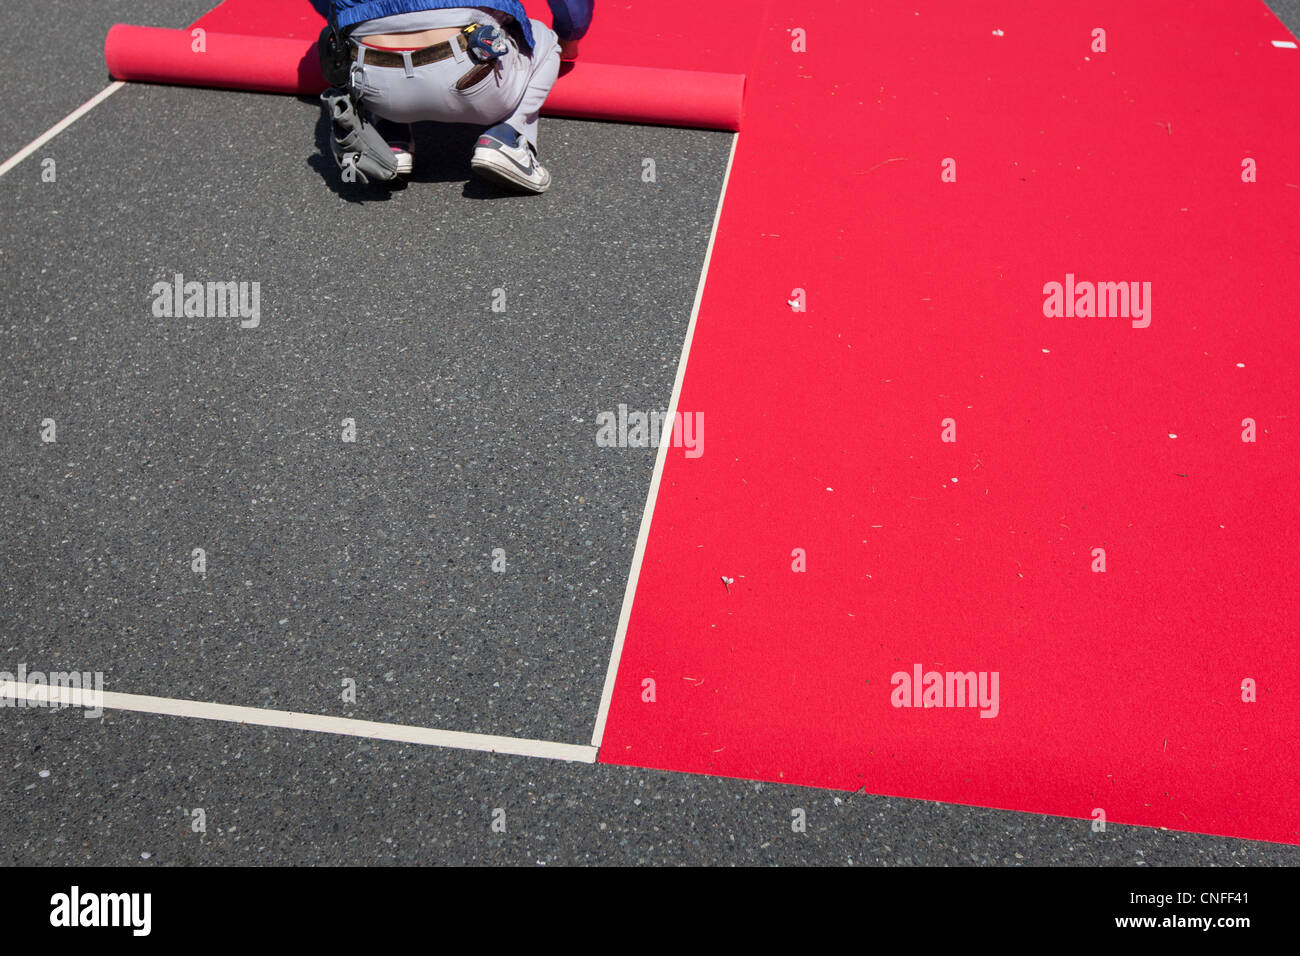 Rolling out the red carpet at entertainment event. Stock Photo